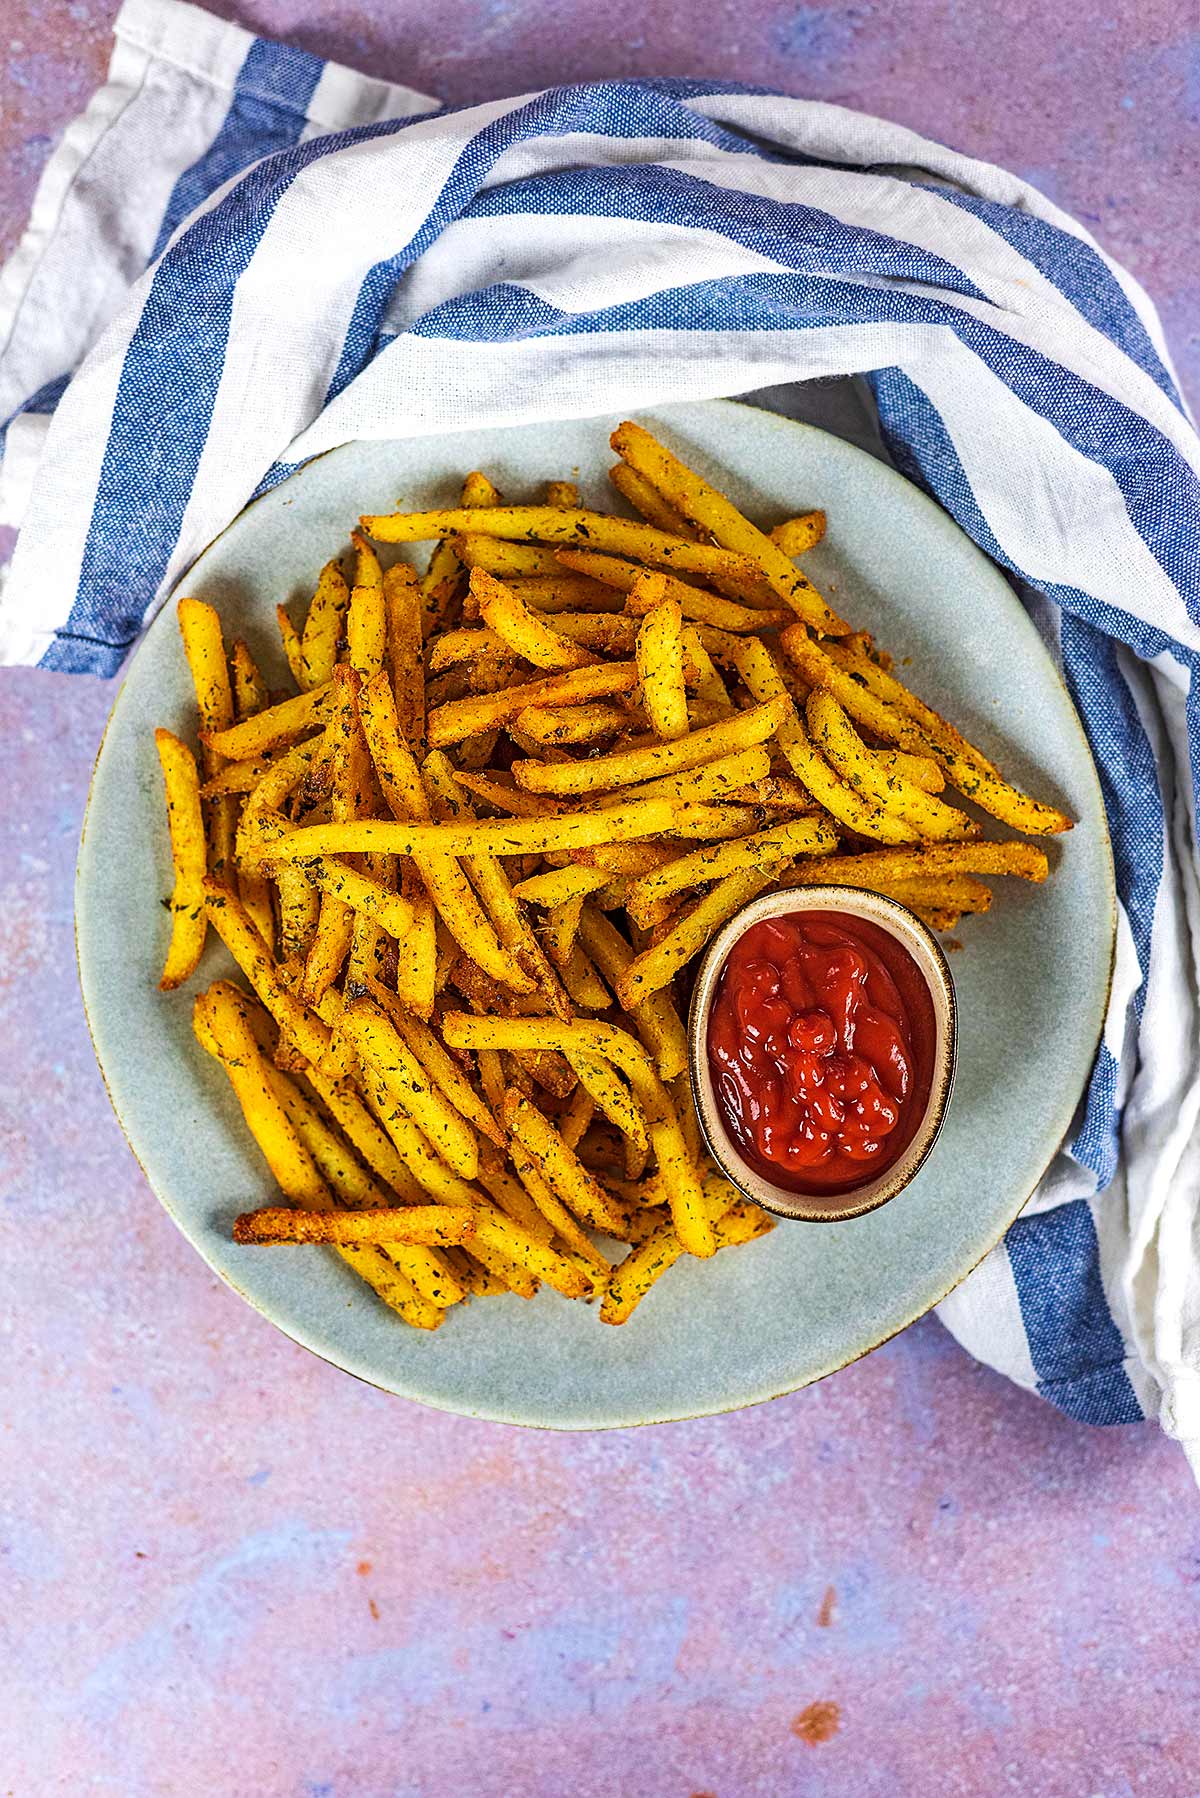 Seasoned fries on a plate with a small dish of ketchup.